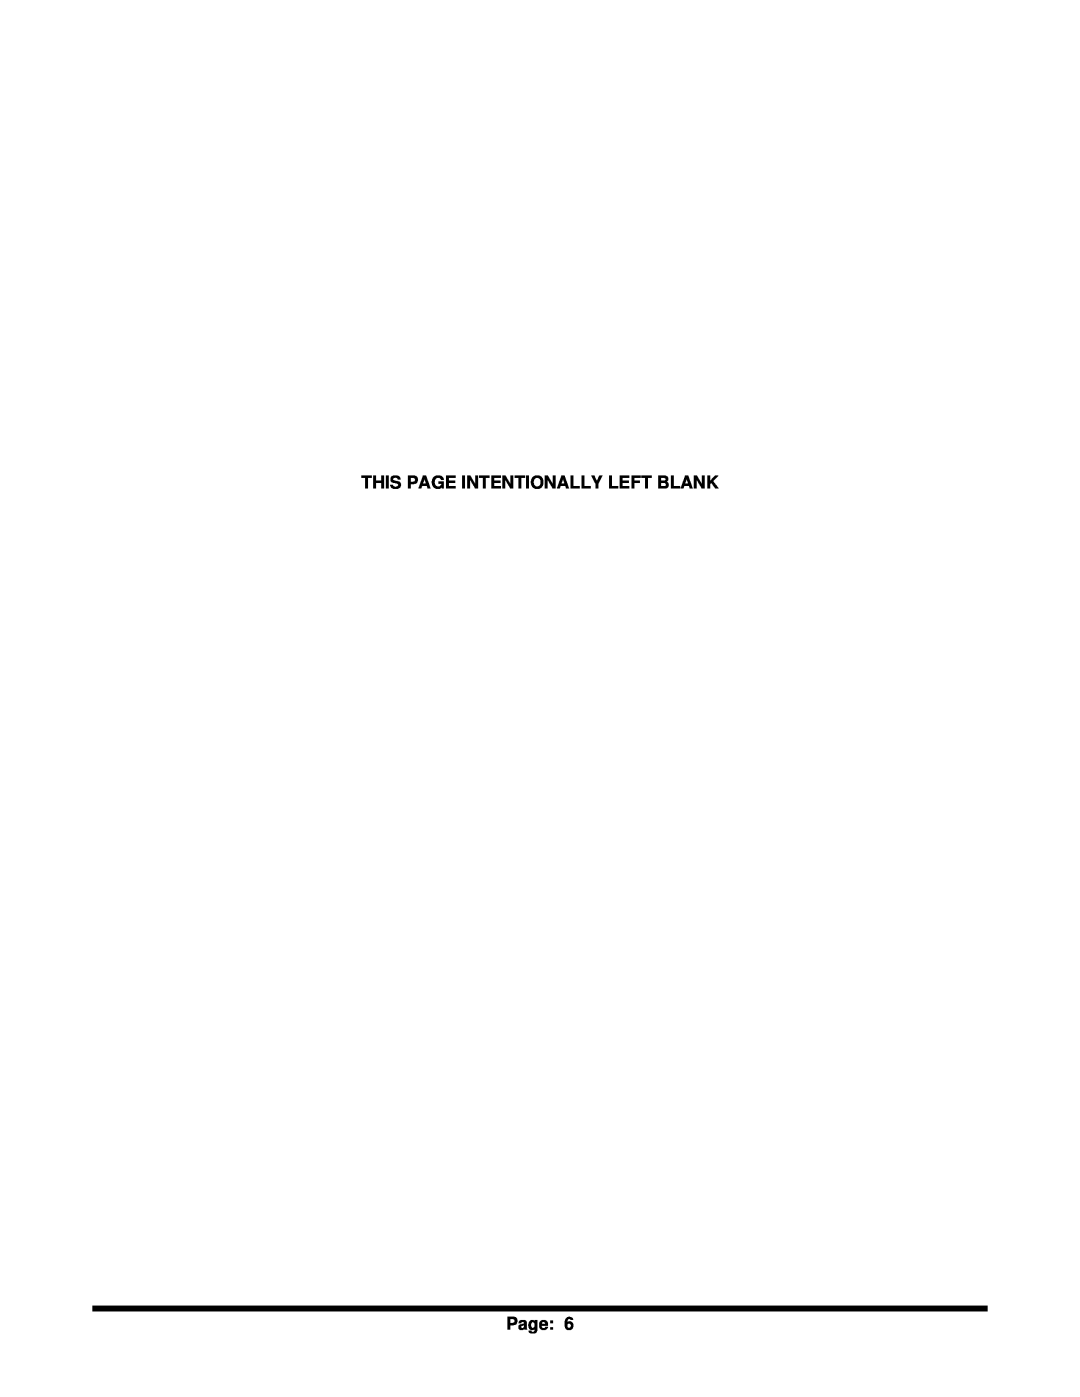 Sierra Monitor Corporation T12020, 5100-06-IT, 5100-05-IT, 5100-04-IT, 5100-03-IT This Page Intentionally Left Blank 